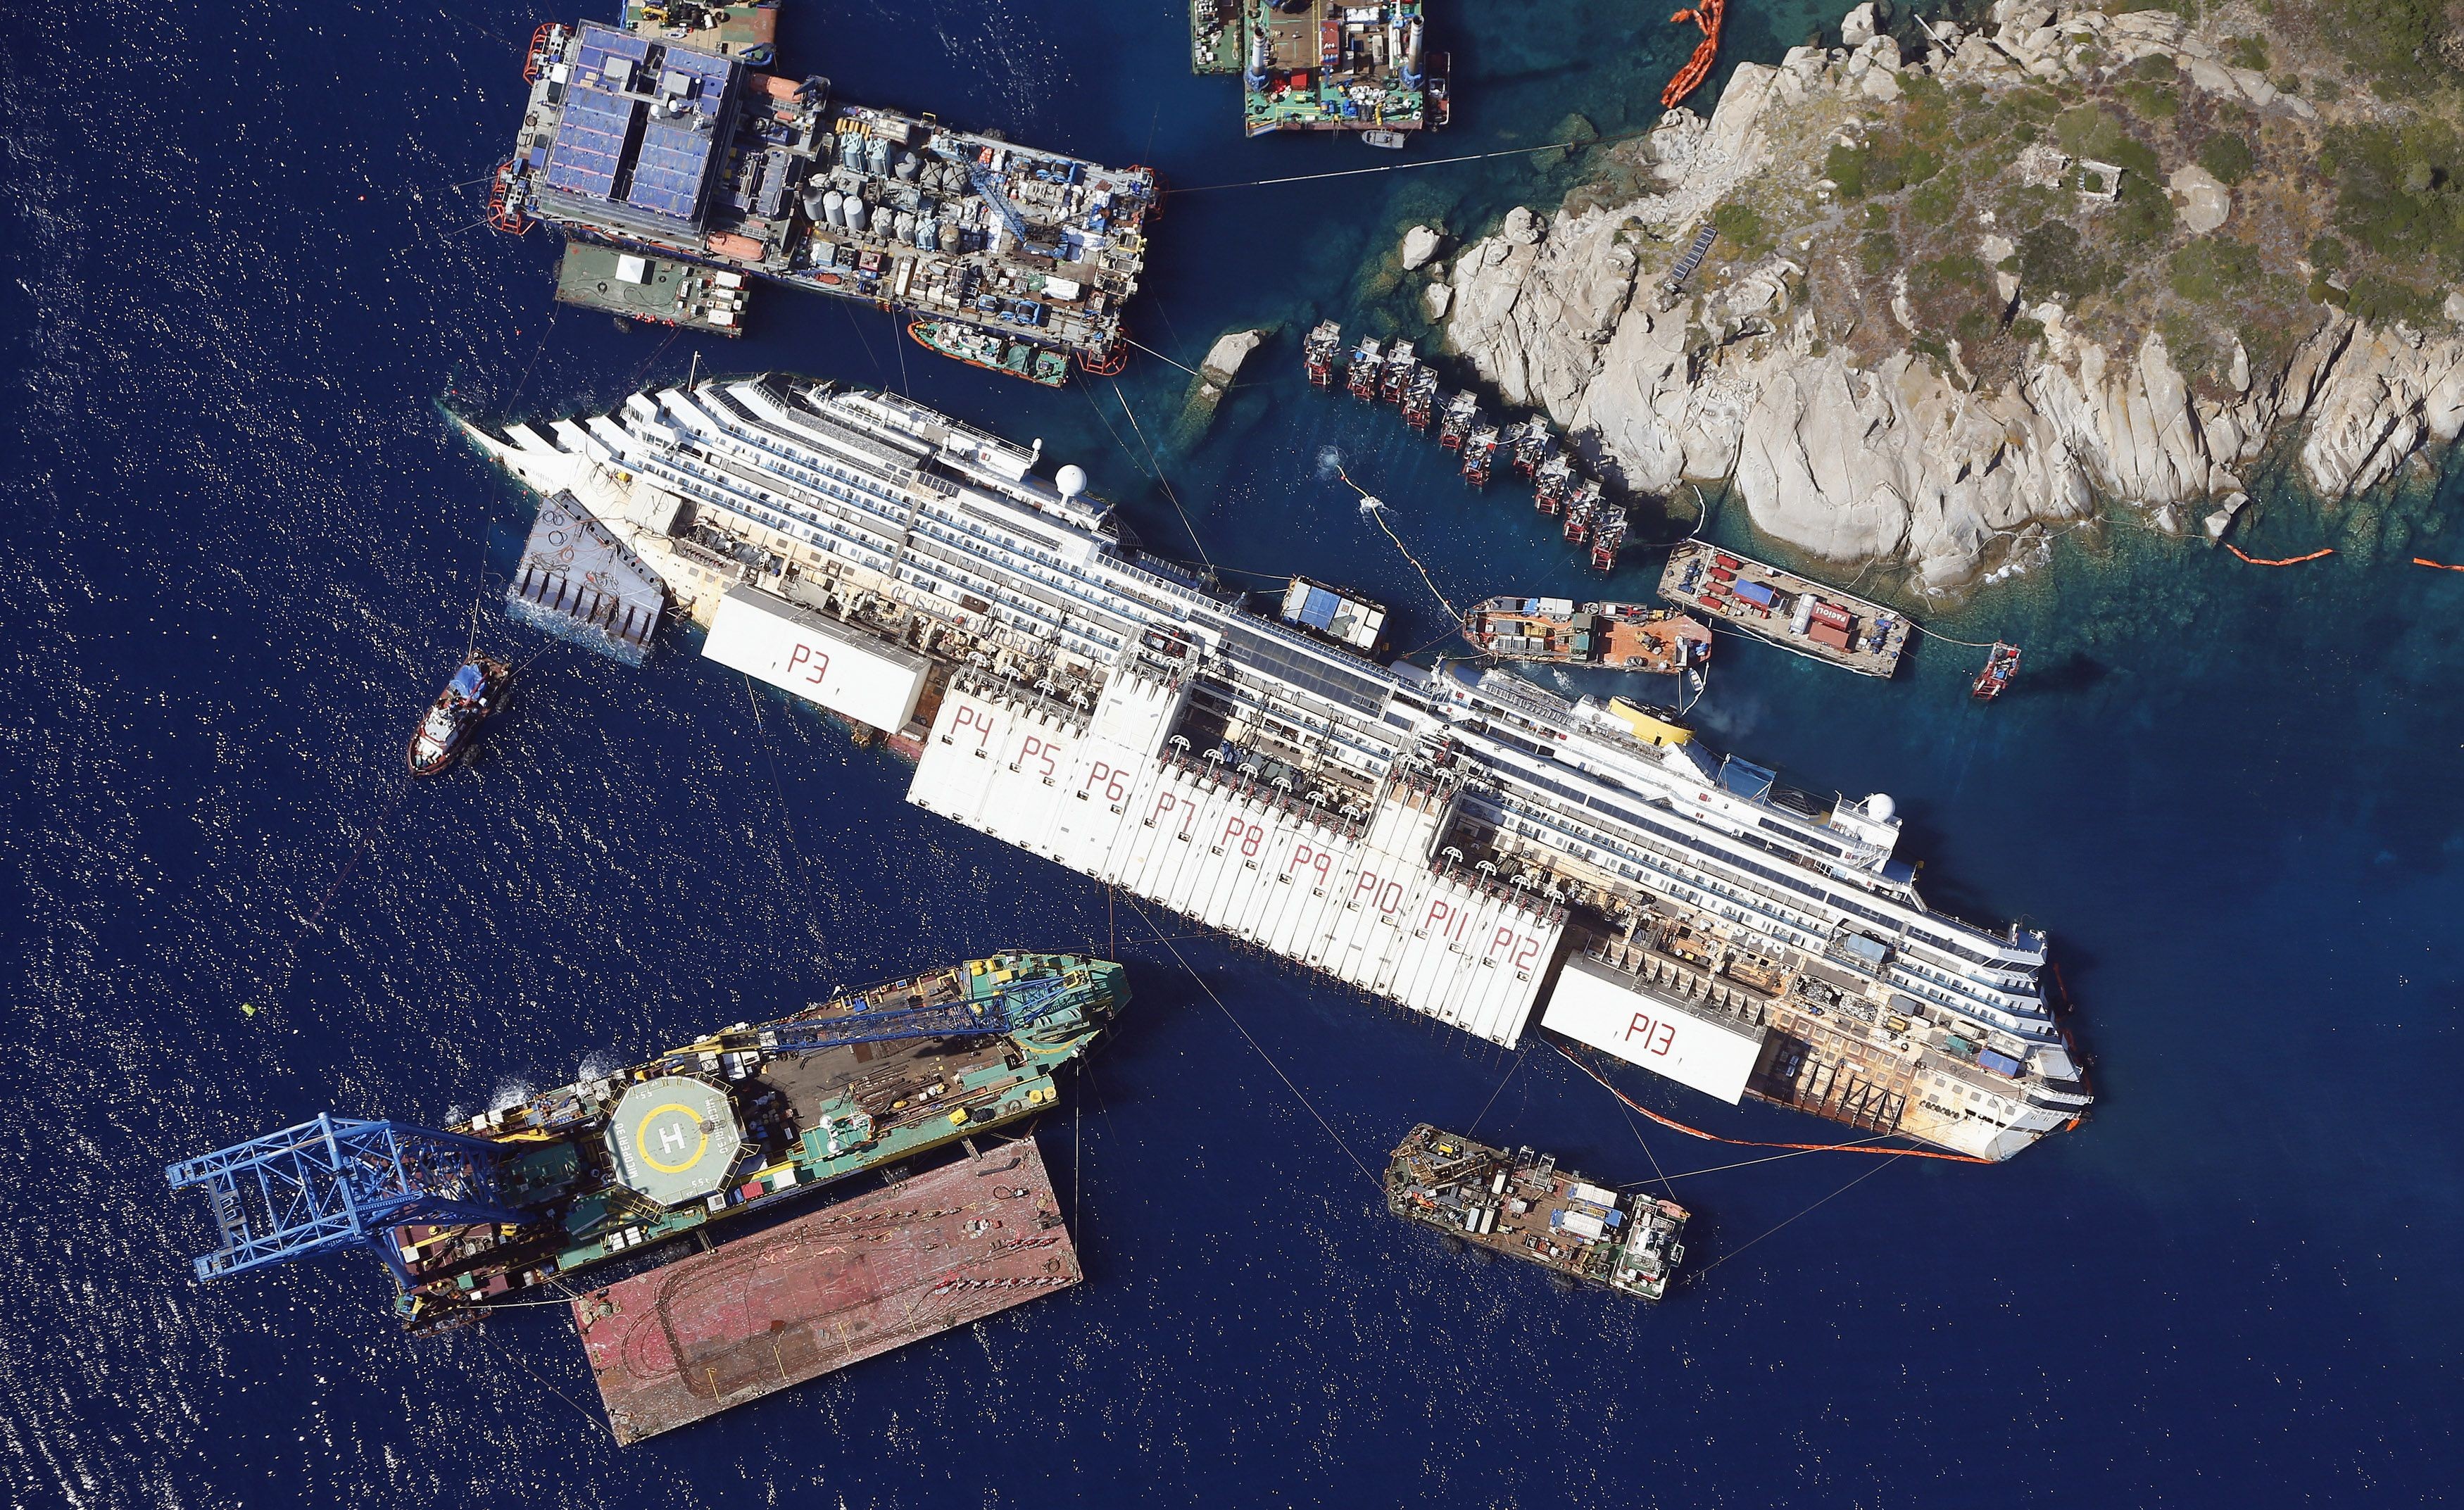 Nature Landscape Aerial View Water Sea Ship Shipwreck Cruise Ship Accidents Coast Cliff Italy Costa  3500x2145